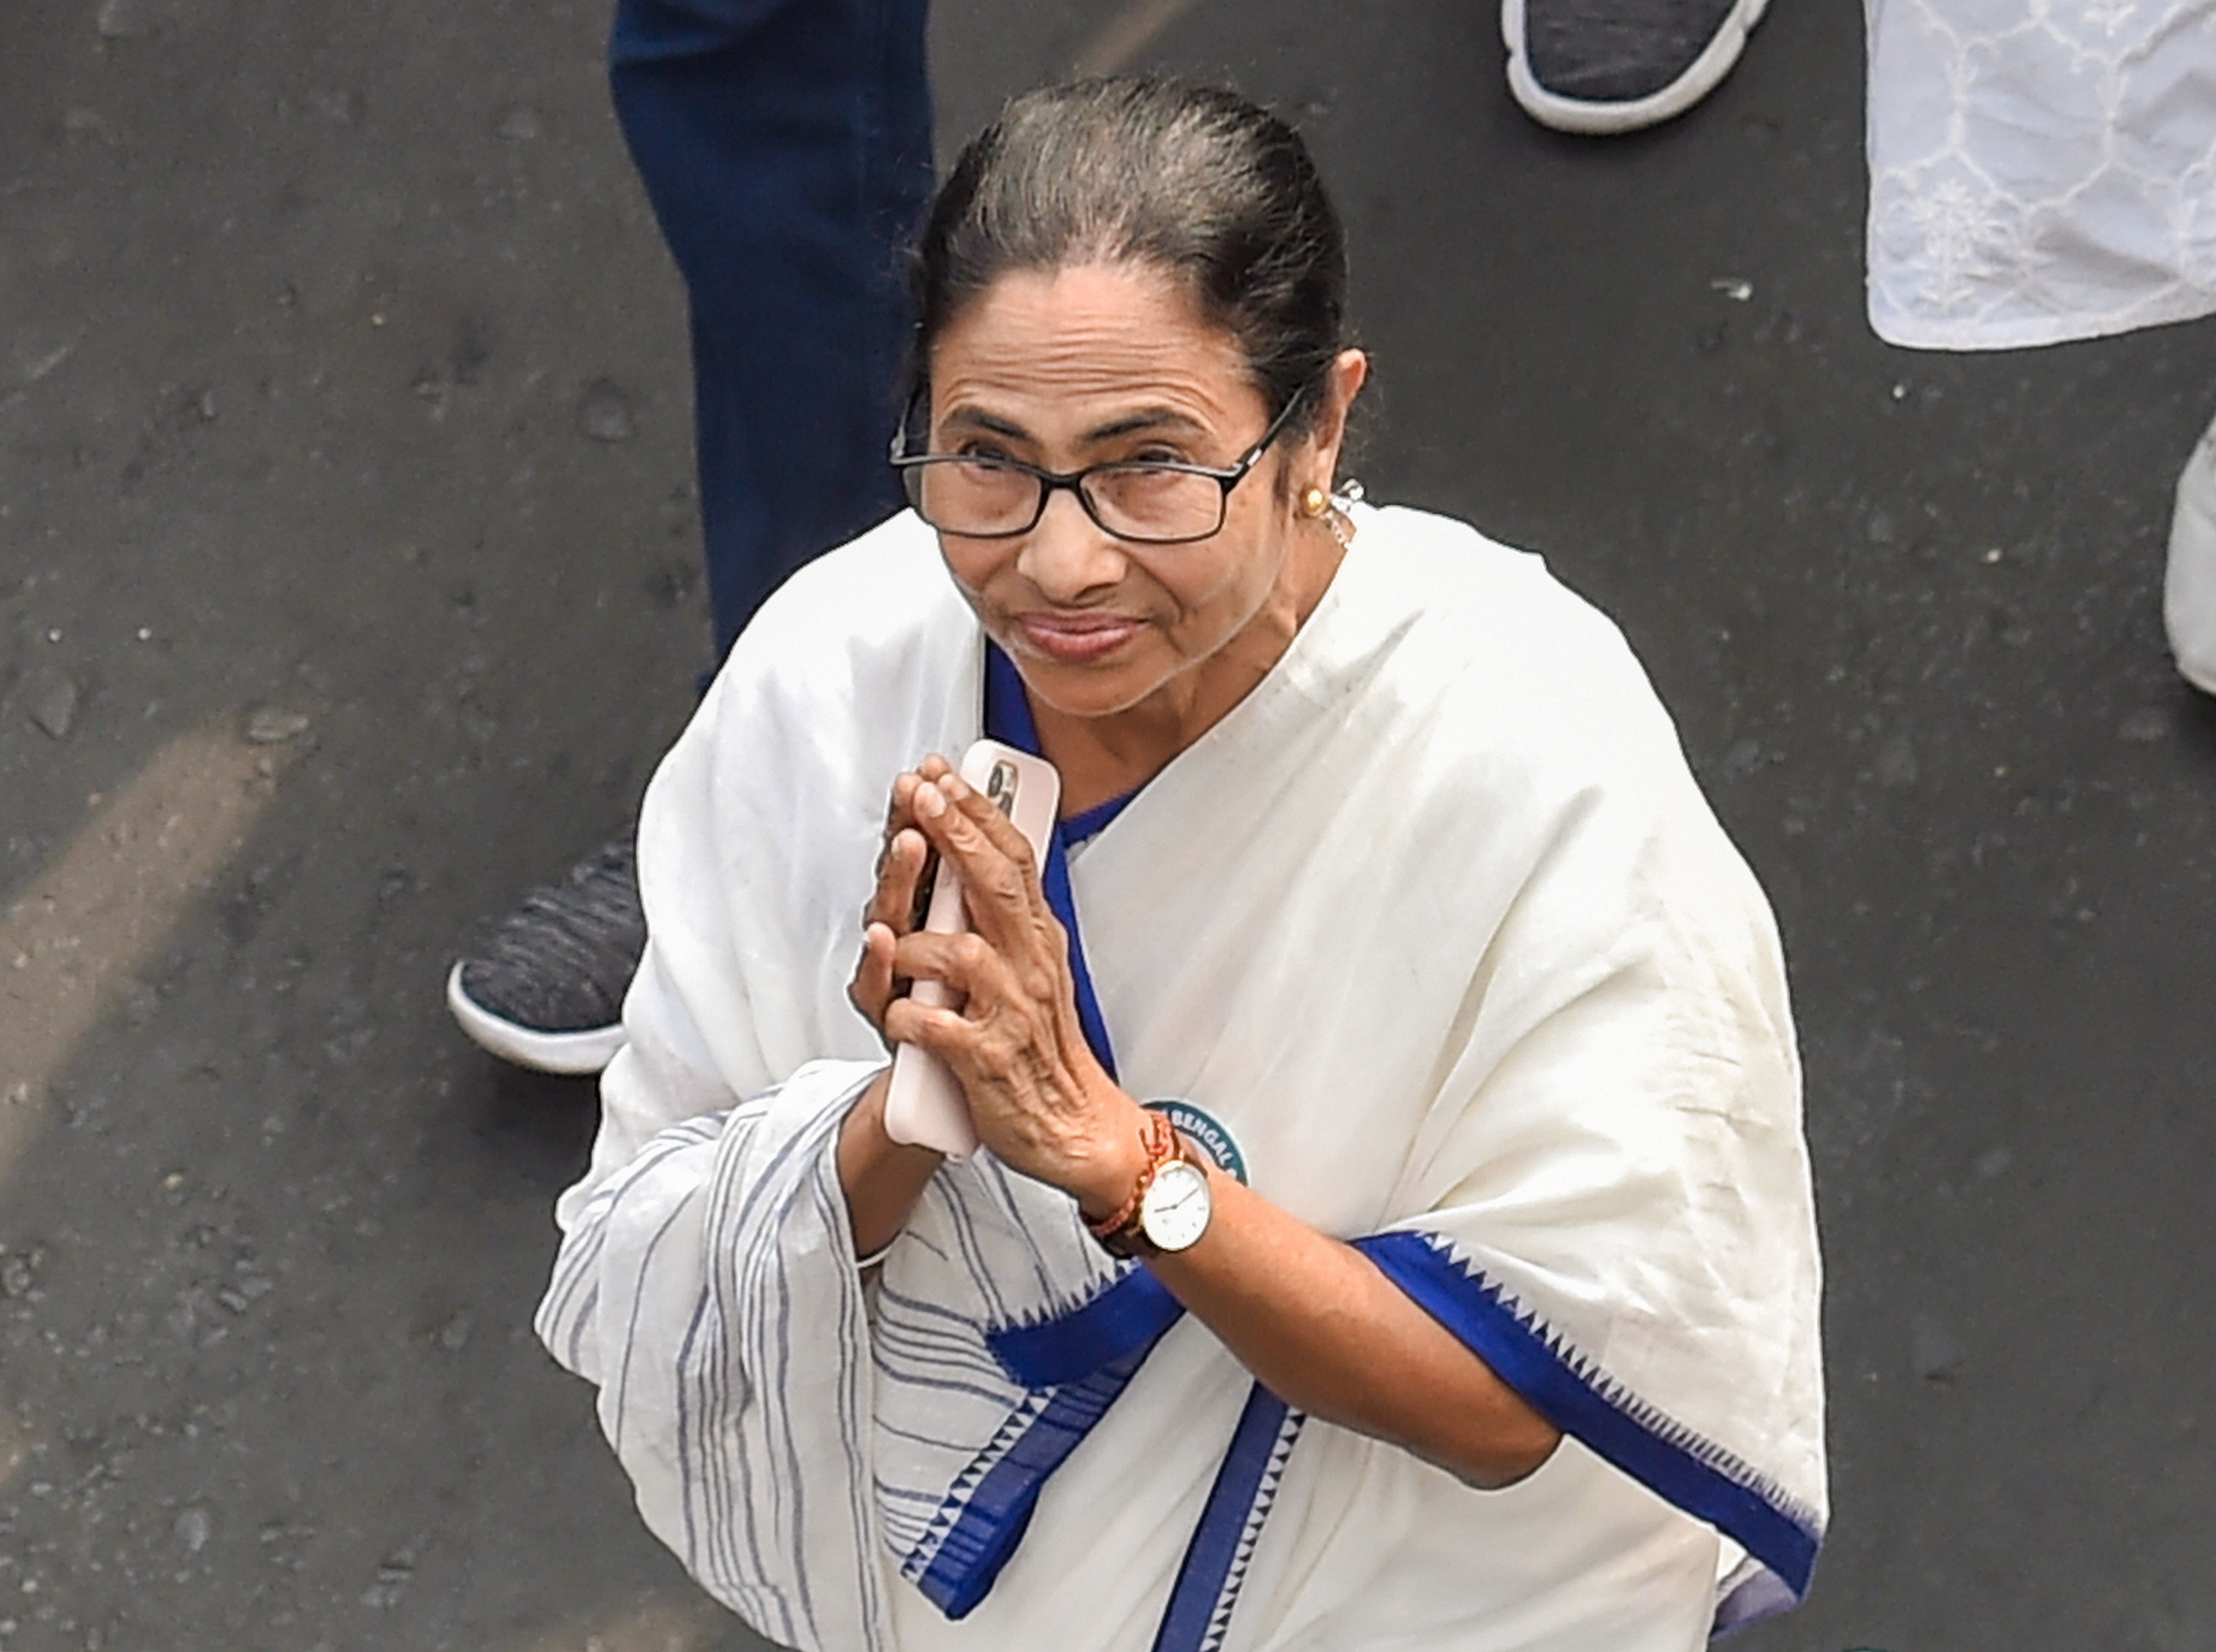 West Bengal Chief Minister Mamata Banerjee leads a rally, vowing not to allow the proposed countrywide NRC and the Amended Citizenship Act in West Bengal, in Kolkata. (PTI Photo)